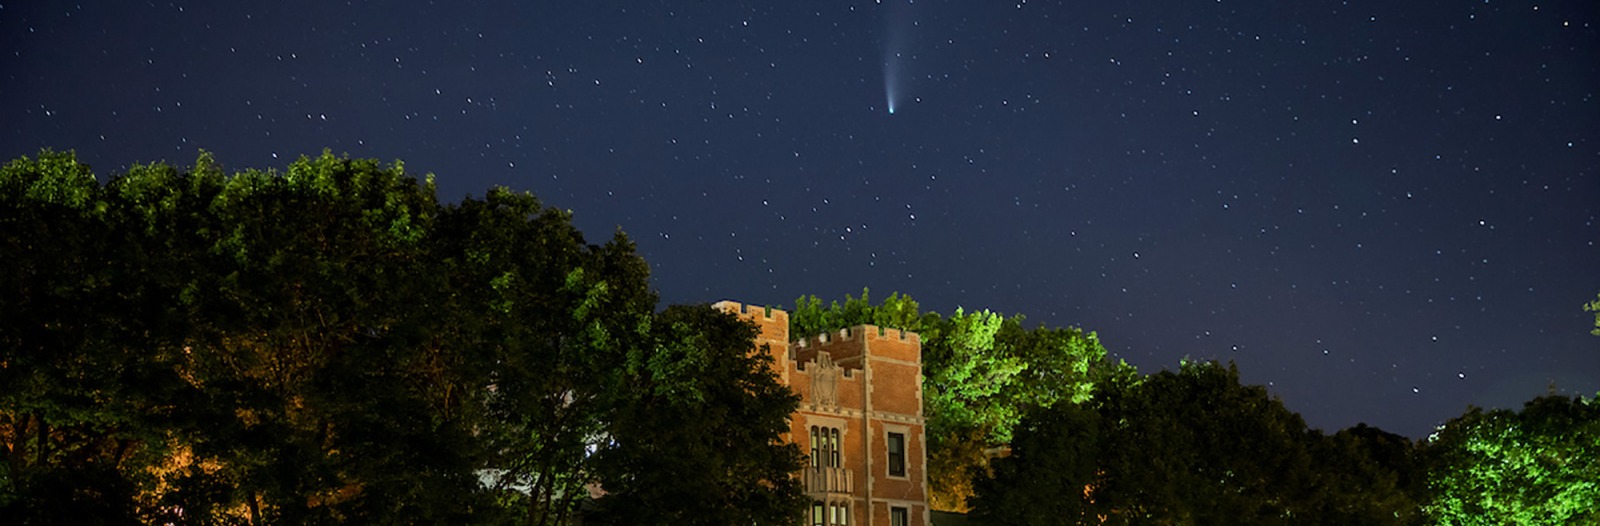 Comet NEOWISE over north campus